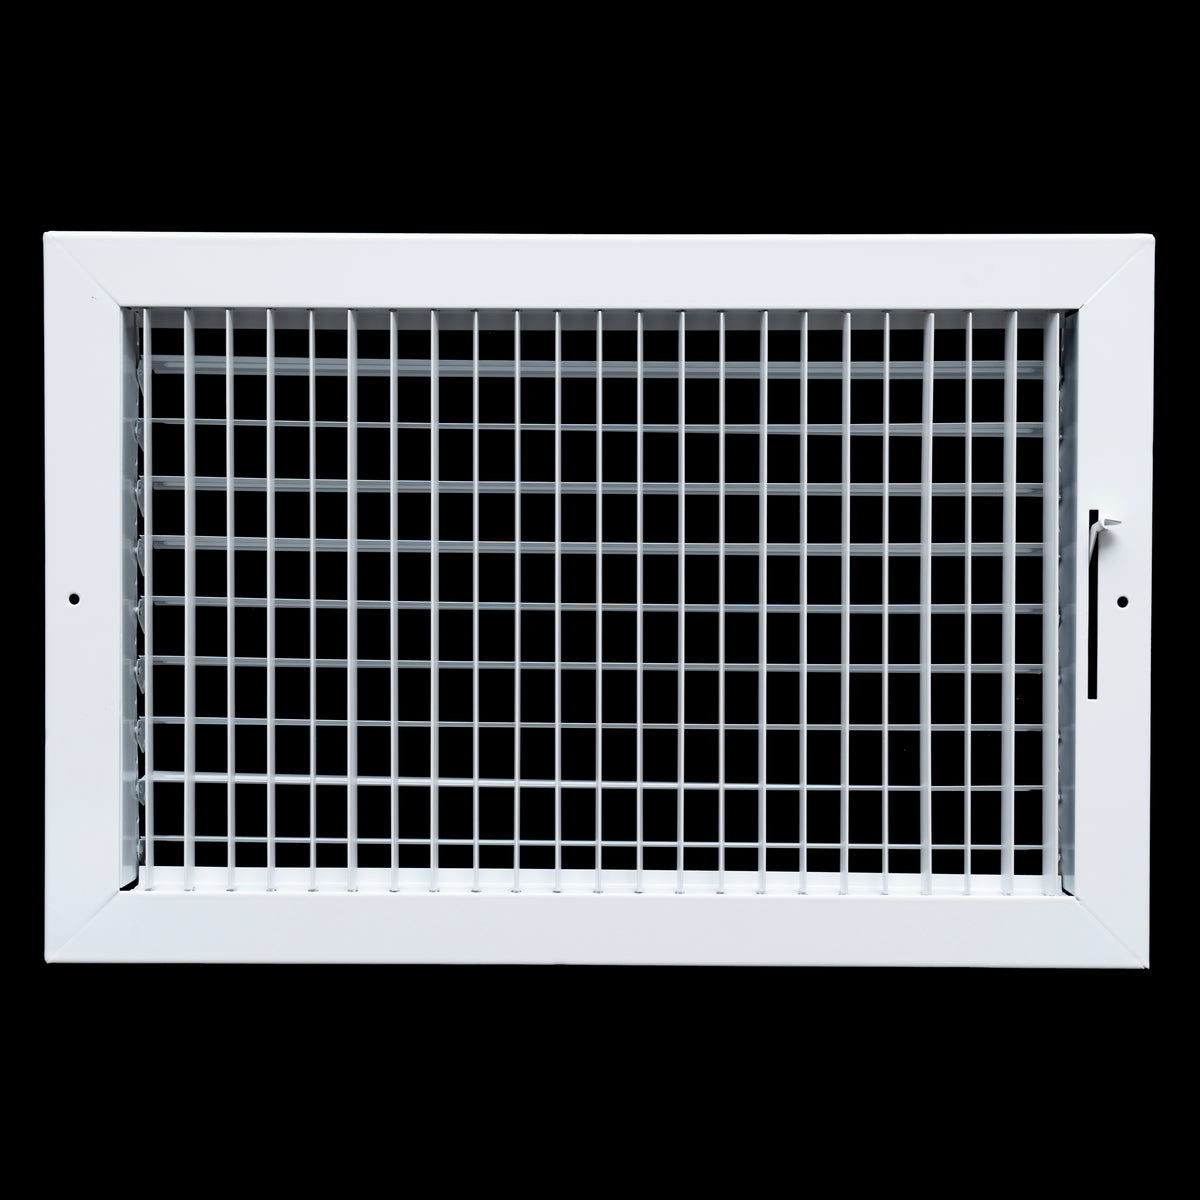 airgrilles 16"w x 10"h steel adjustable air supply grille   register vent cover grill for sidewall and ceiling   white   outer dimensions: 17.75"w x 11.75"h for 16x10 duct opening hnd-adj-wh-16x10-v1